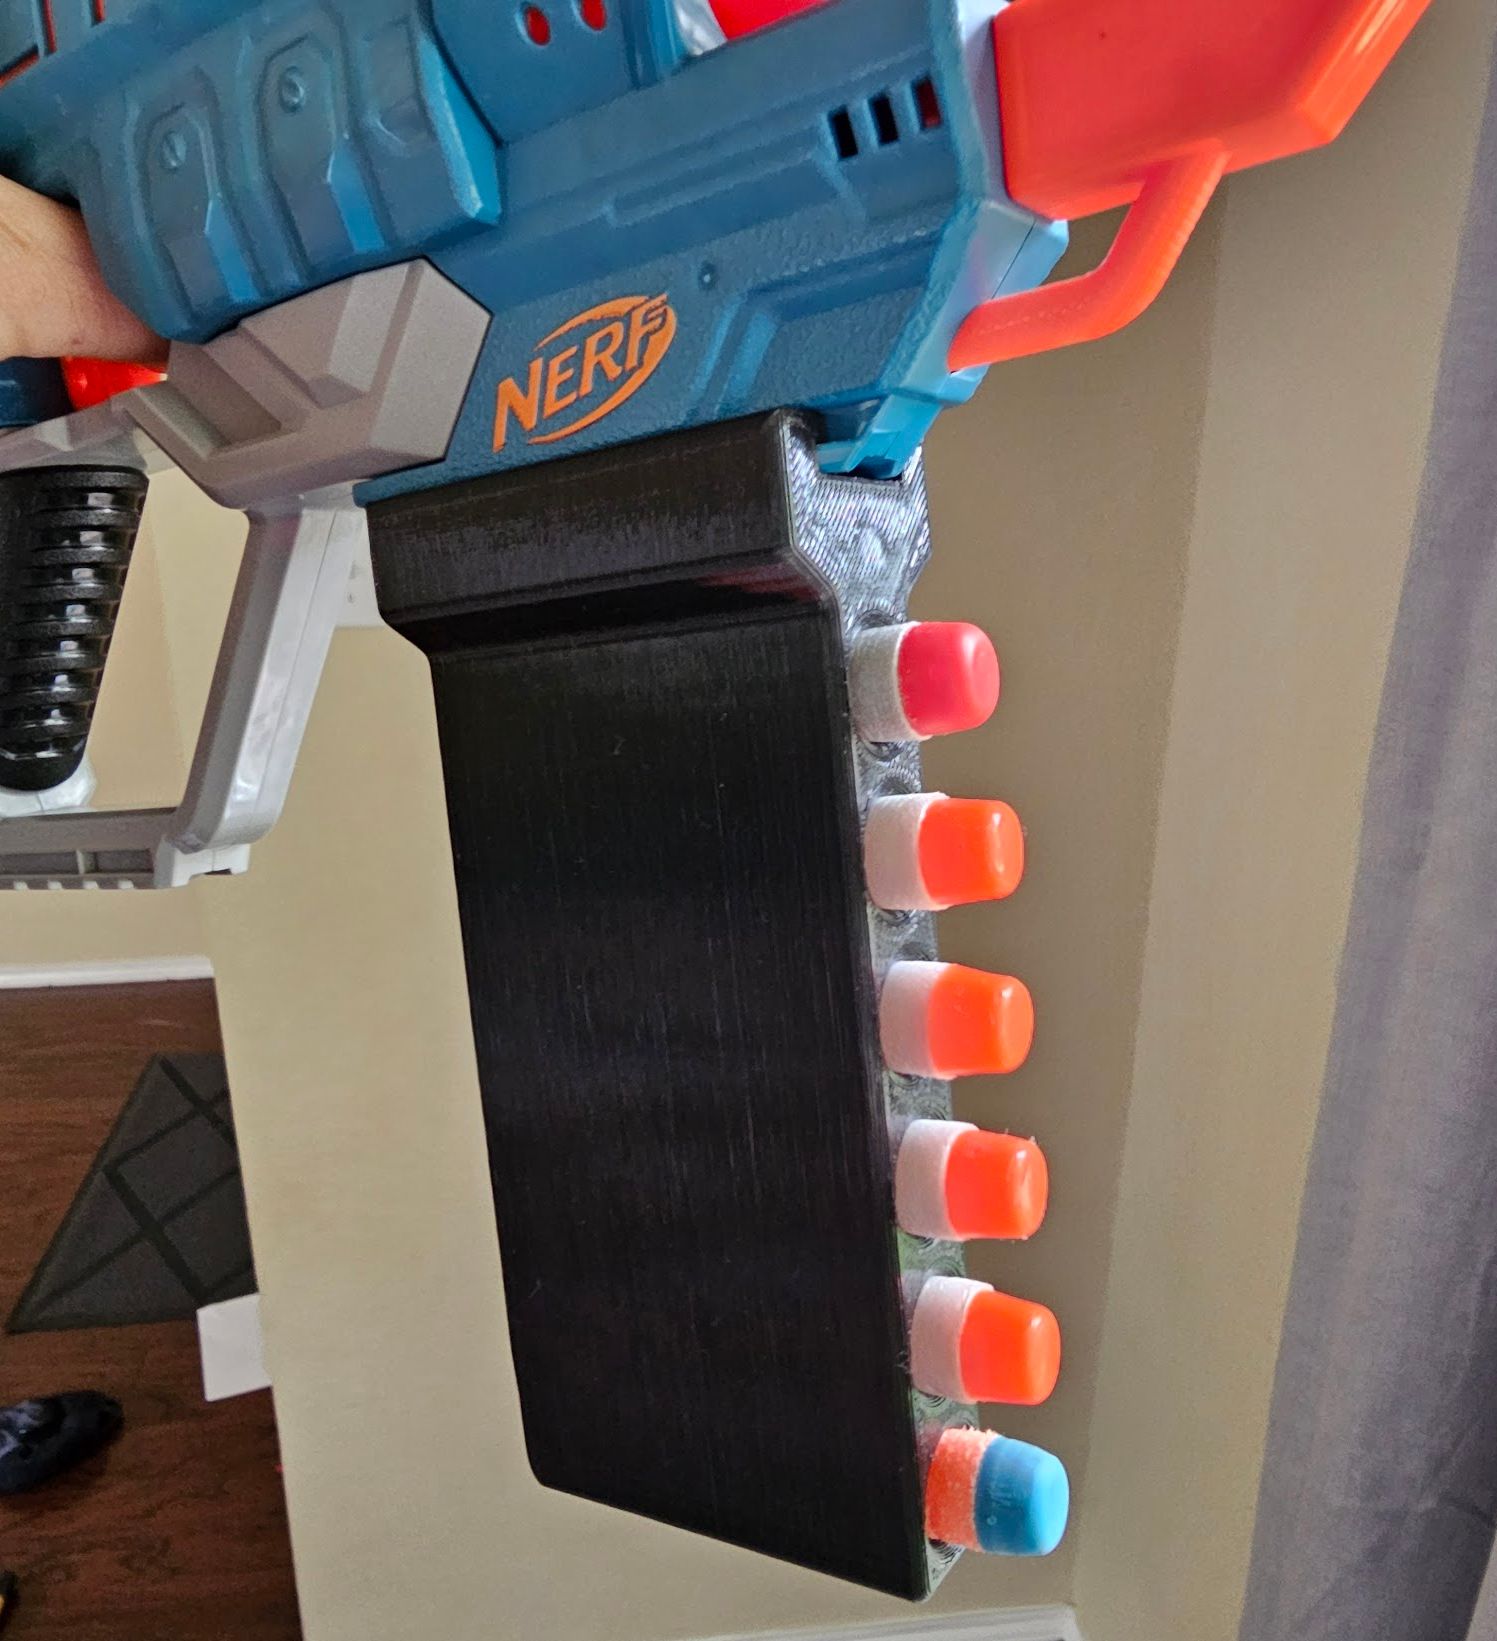 A Nerf Gun Mod: Enabling the next generation of Makers